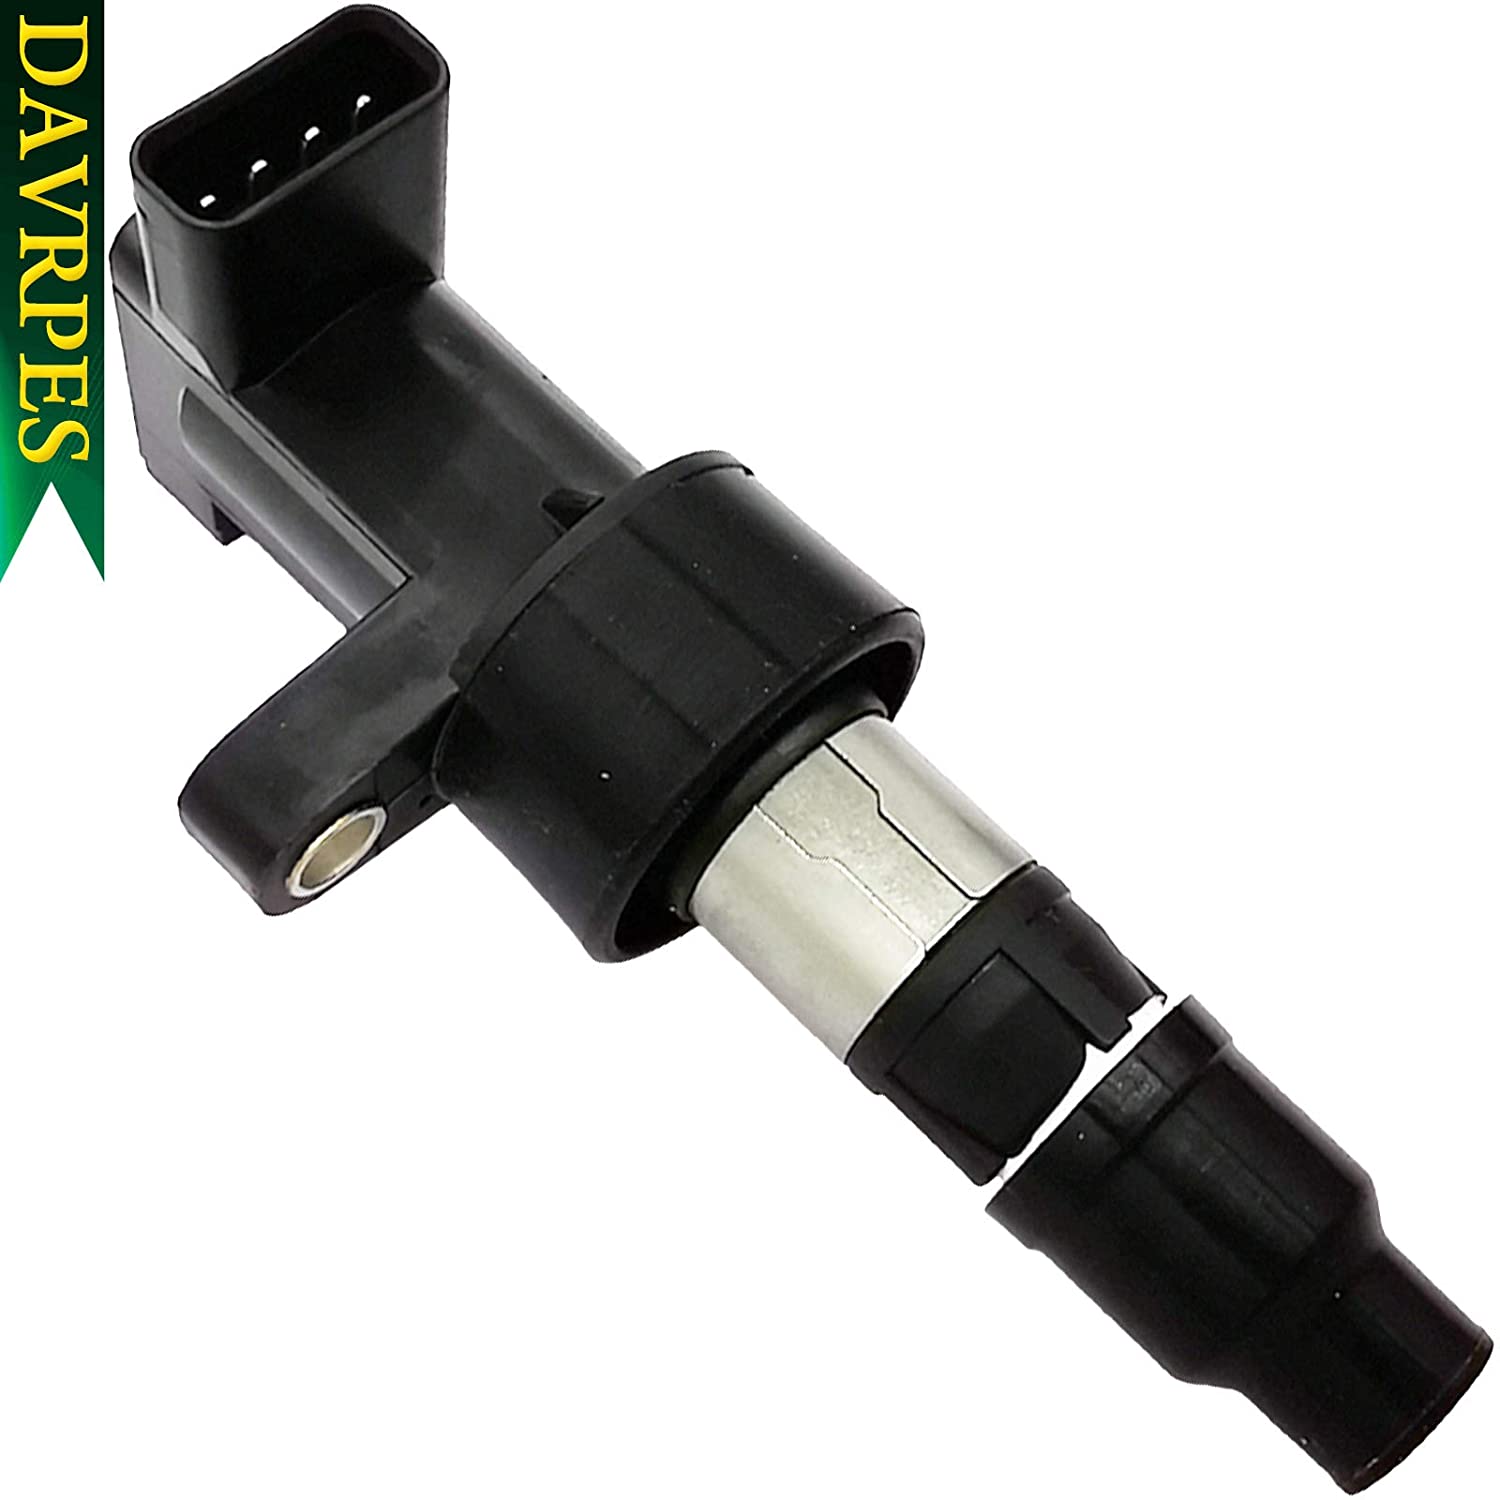 DAVRPES UF-435 Ignition Coil Pack For 2003-2008 Jaguar S-Type, 2002-2008 X-Type 2.5L 3.0L V6 Replace# UF435｜C1402｜5C1399｜178-8287｜E915｜52-1750｜IC555